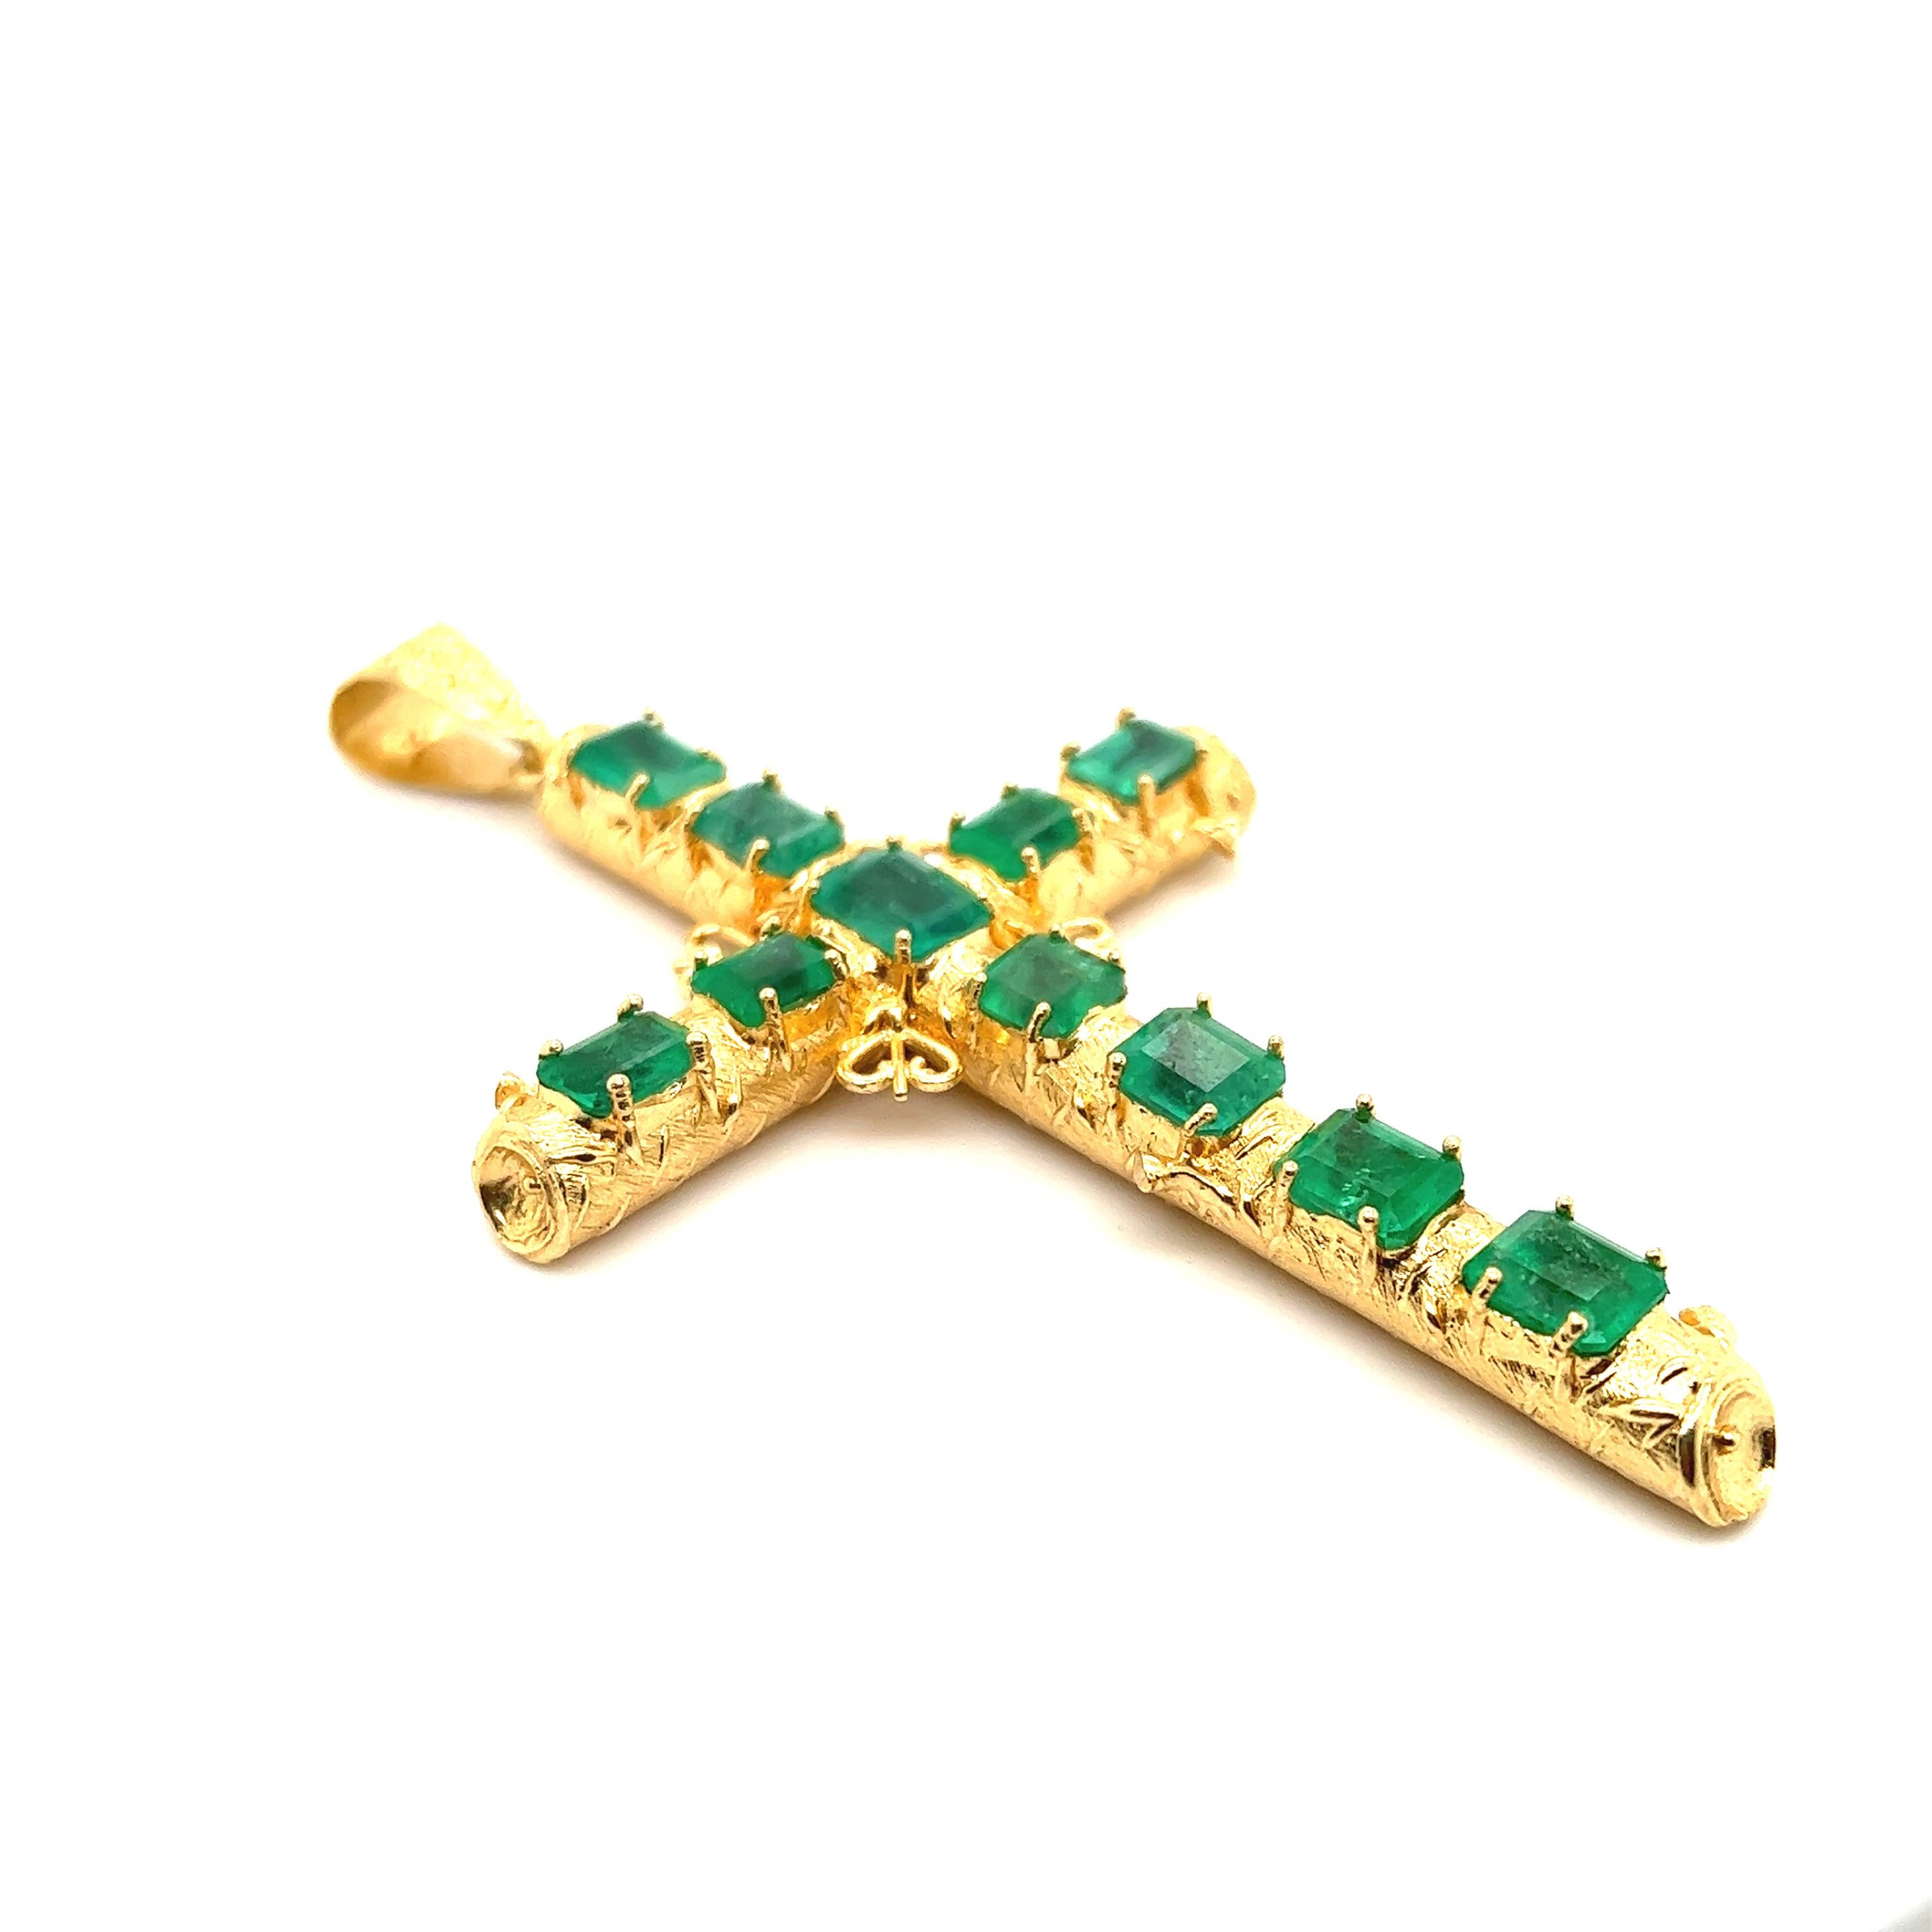 Beautiful one of a kind vintage design. This masterpiece is crafted in 18k yellow gold. Details are seen throughout as the cross has a detailed finish as if it was a thorn bush, with thorns even protruding in certain areas. The highlight of this